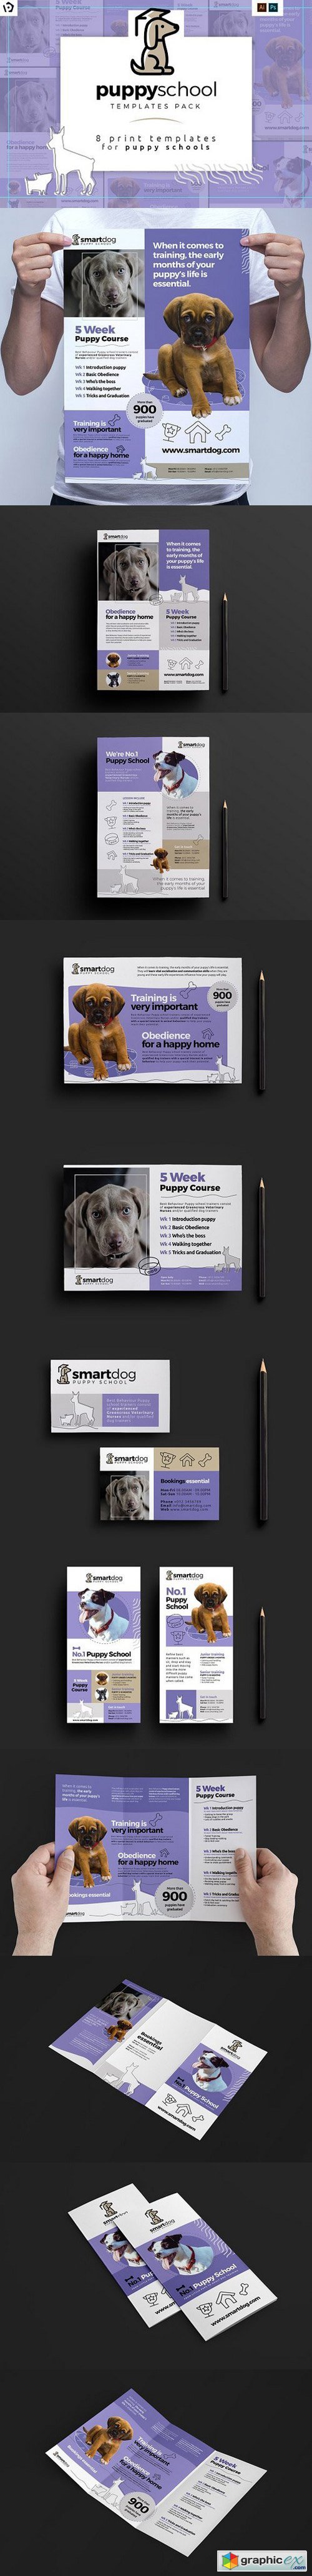 Puppy School Templates Pack